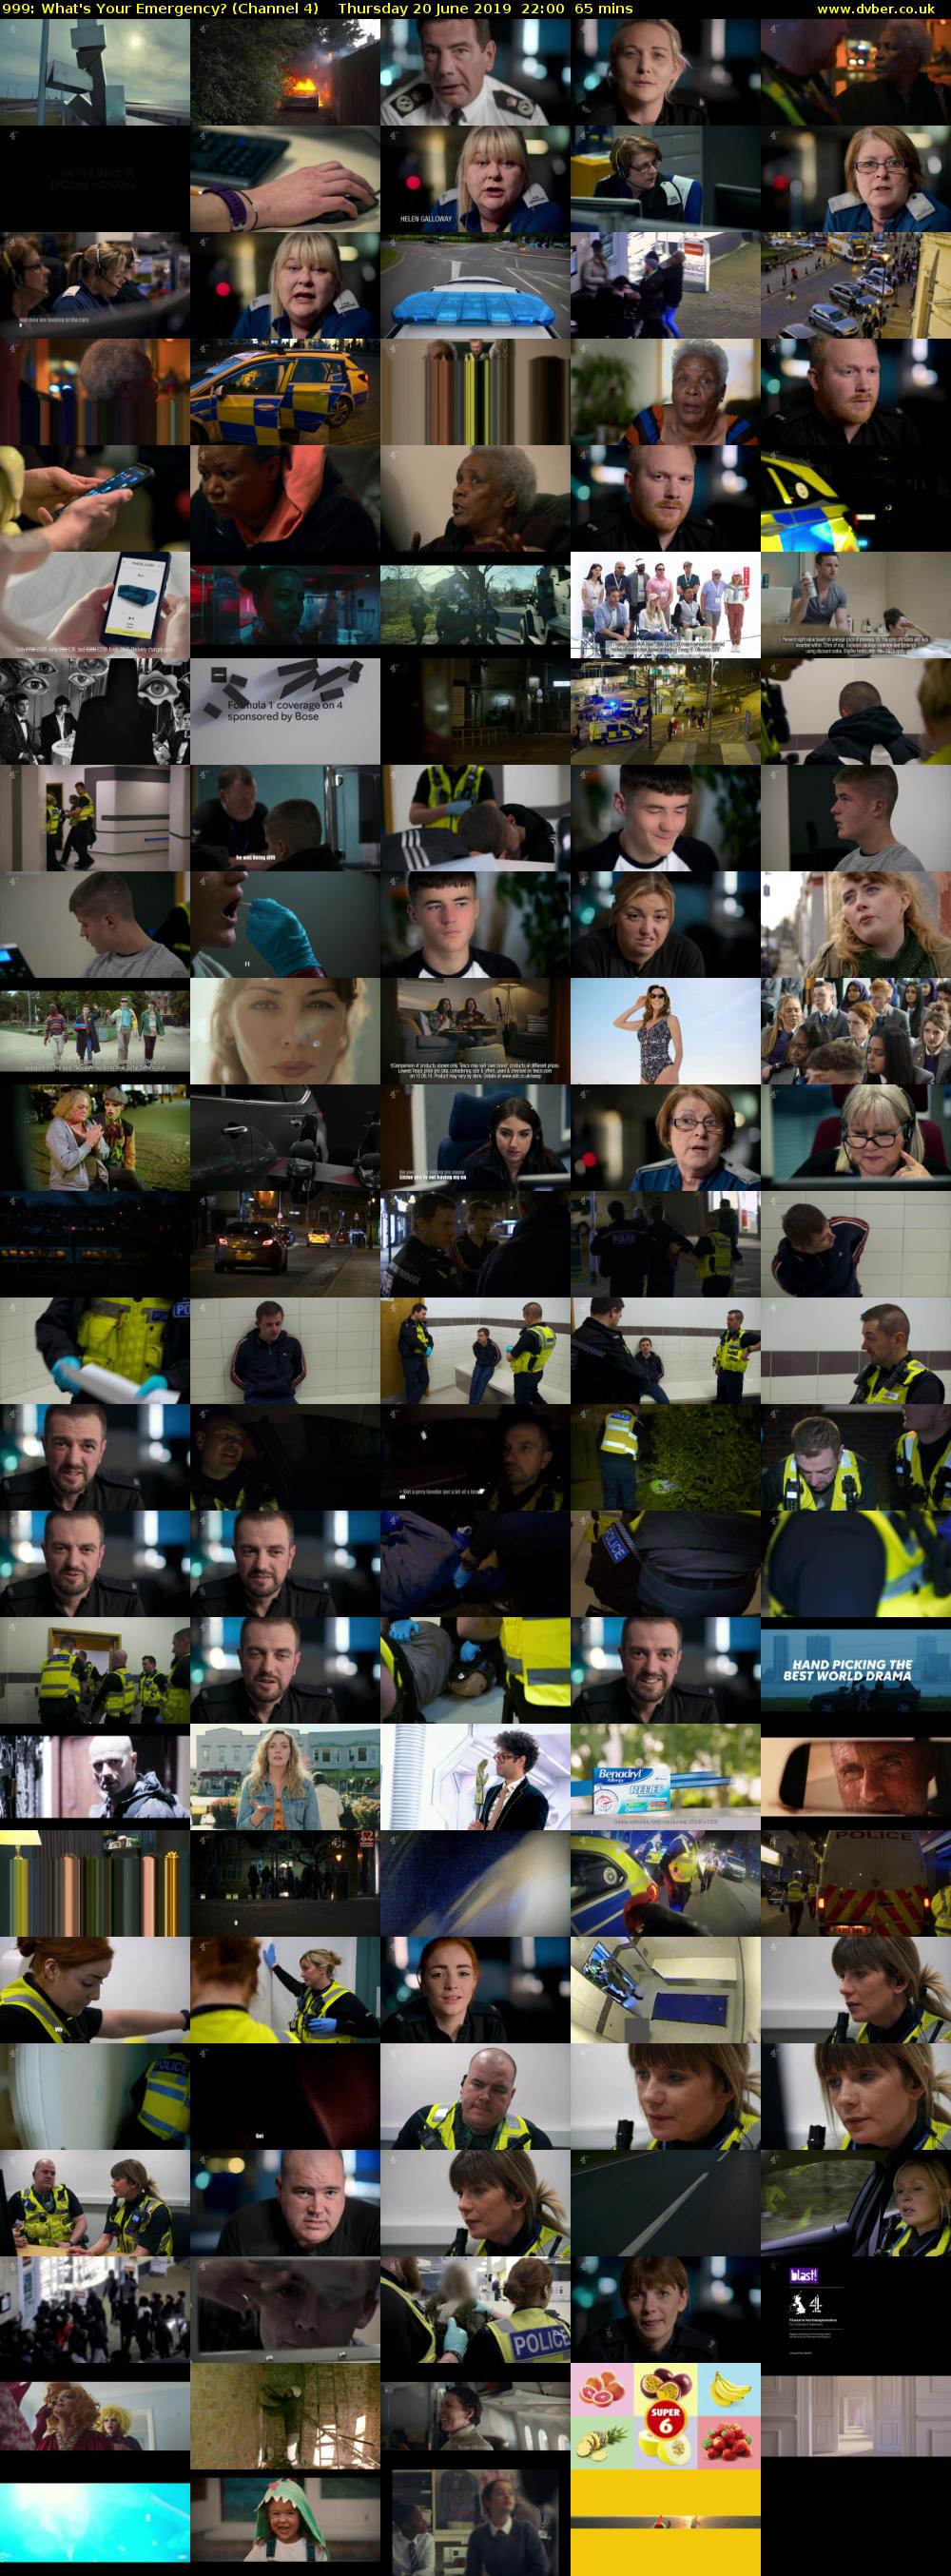 999: What's Your Emergency? (Channel 4) Thursday 20 June 2019 22:00 - 23:05